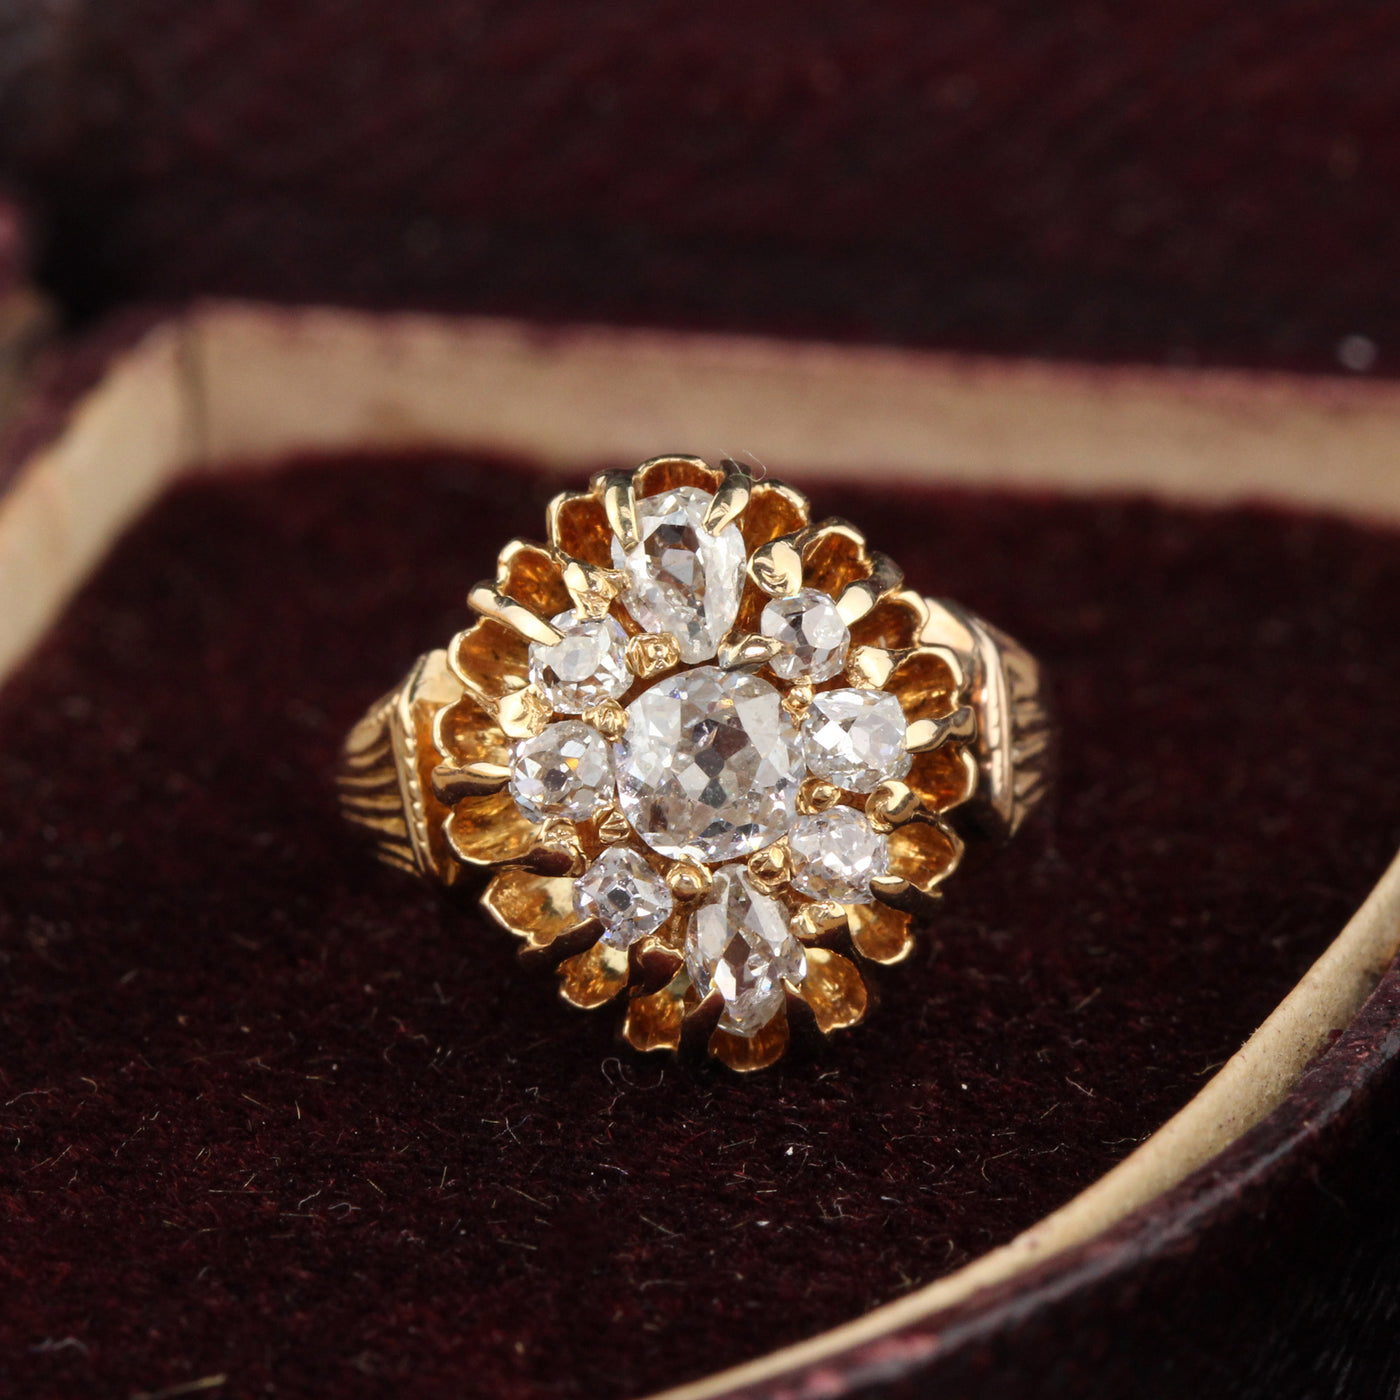 Antique Victorian 18K Rose Gold & Old Cut Diamond Cluster Ring - The Antique Parlour